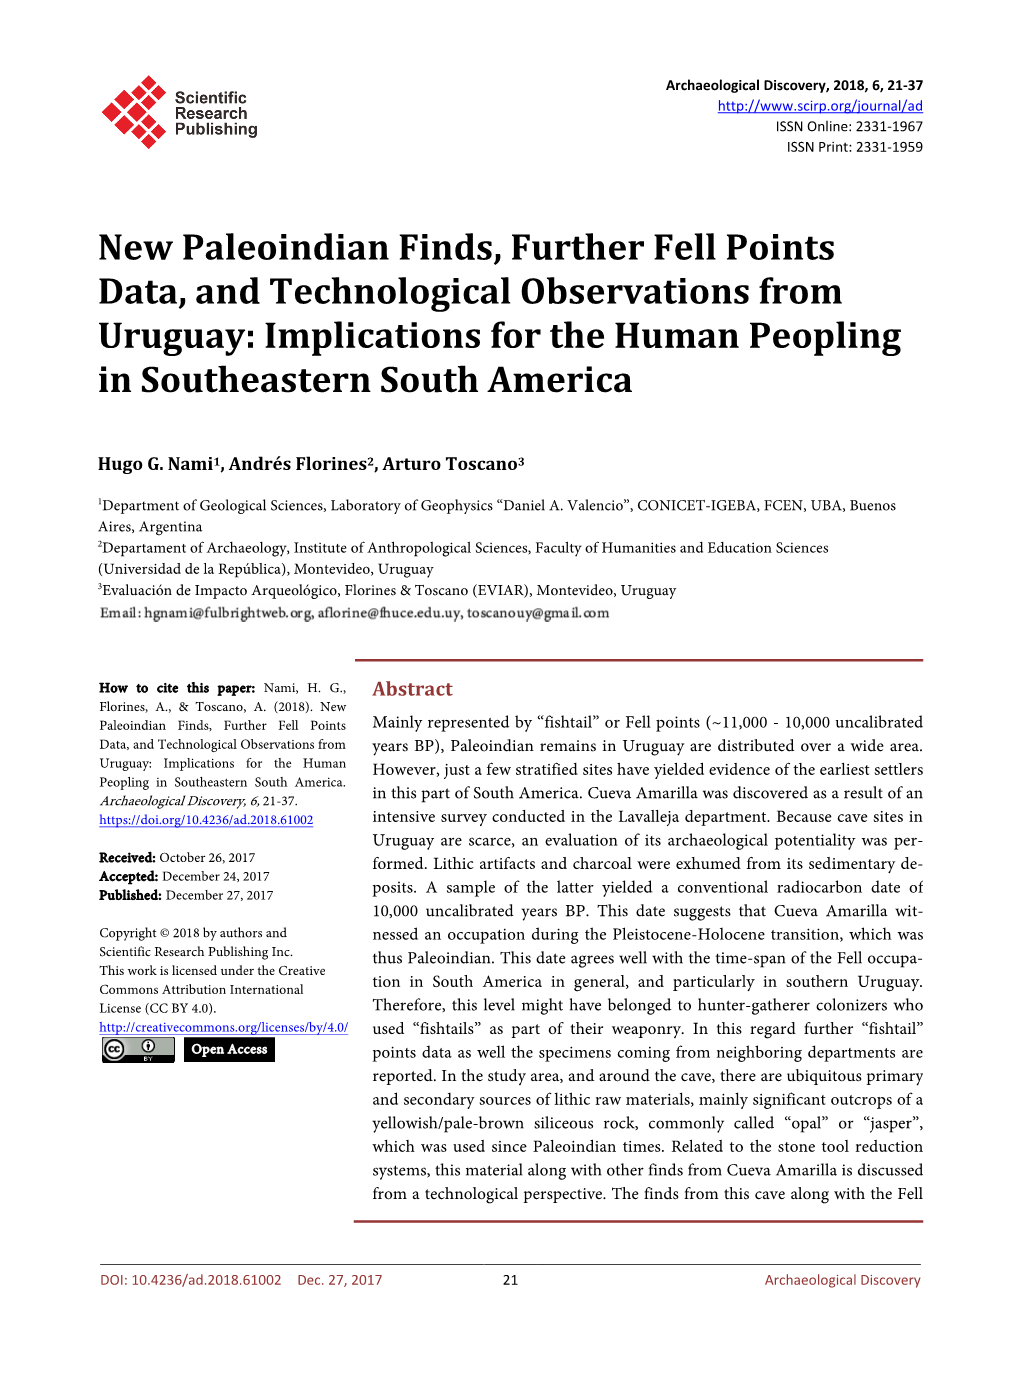 New Paleoindian Finds, Further Fell Points Data, and Technological Observations from Uruguay: Implications for the Human Peopling in Southeastern South America